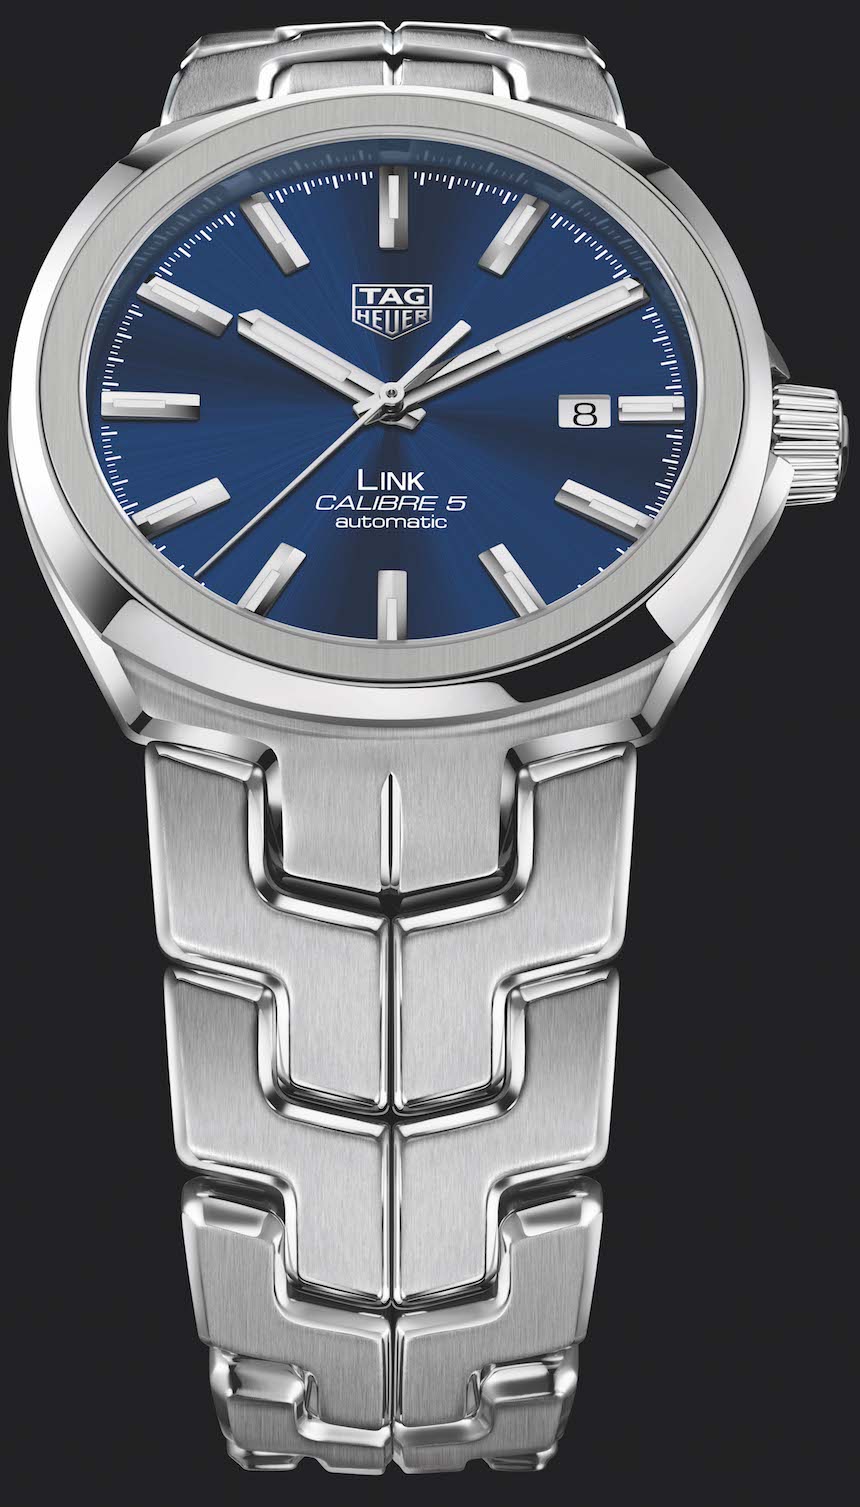 TAG Heuer Link Watches Redesigned For 2017 Watch Releases 